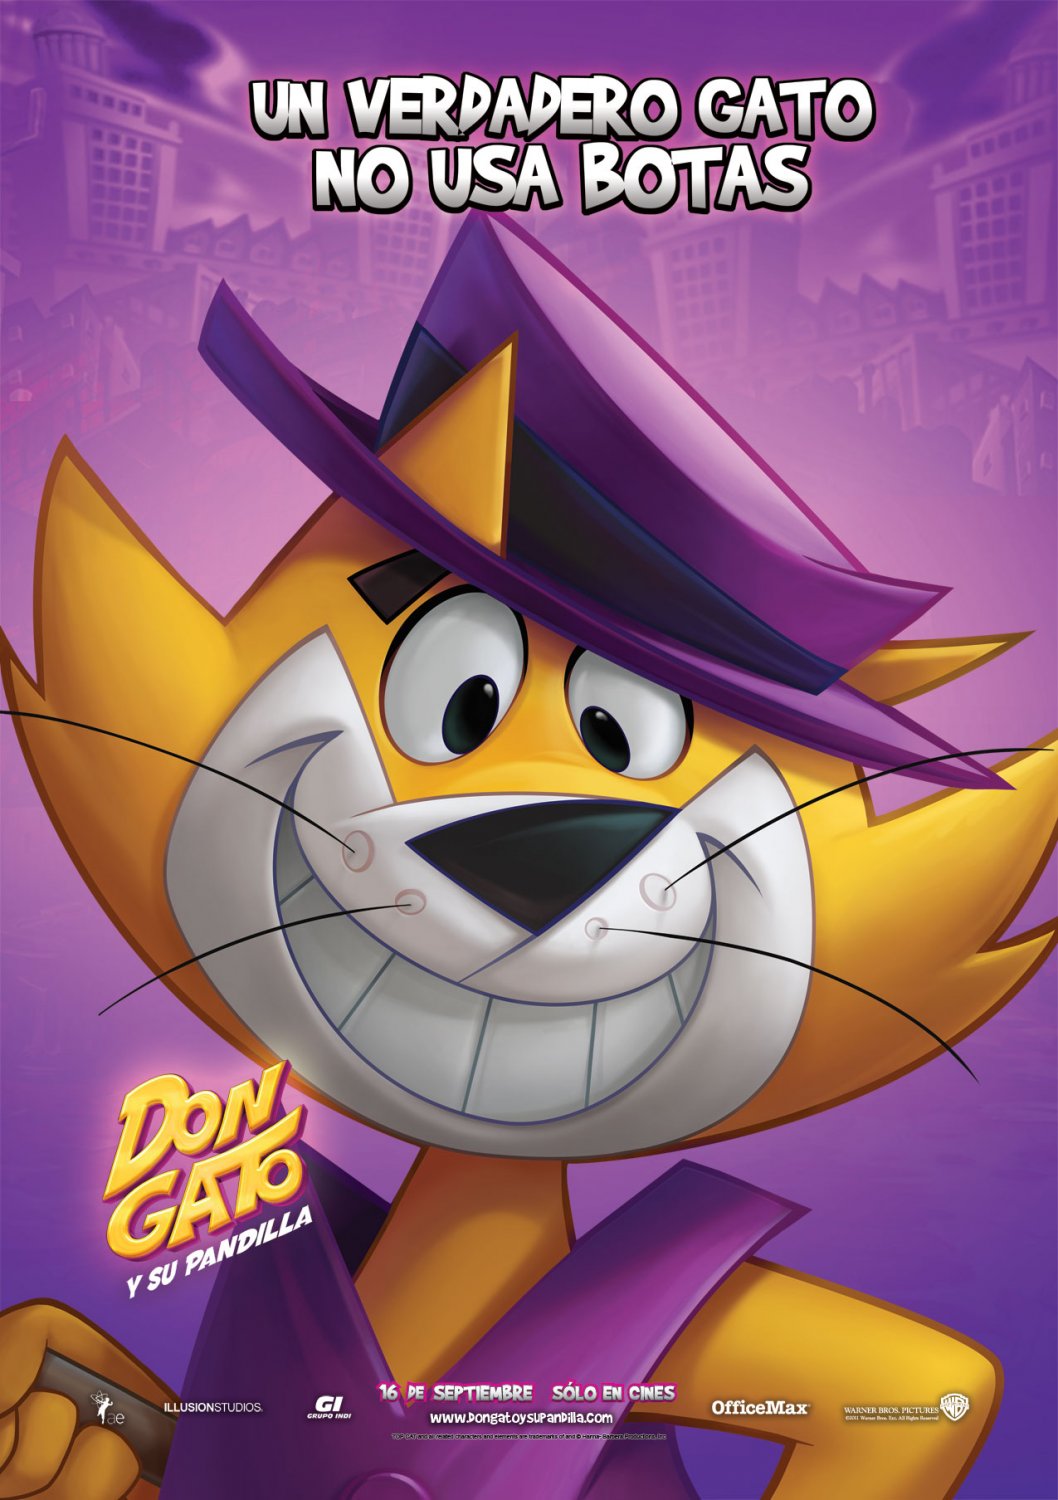 Extra Large Movie Poster Image for Don Gato y su pandilla (#5 of 12)